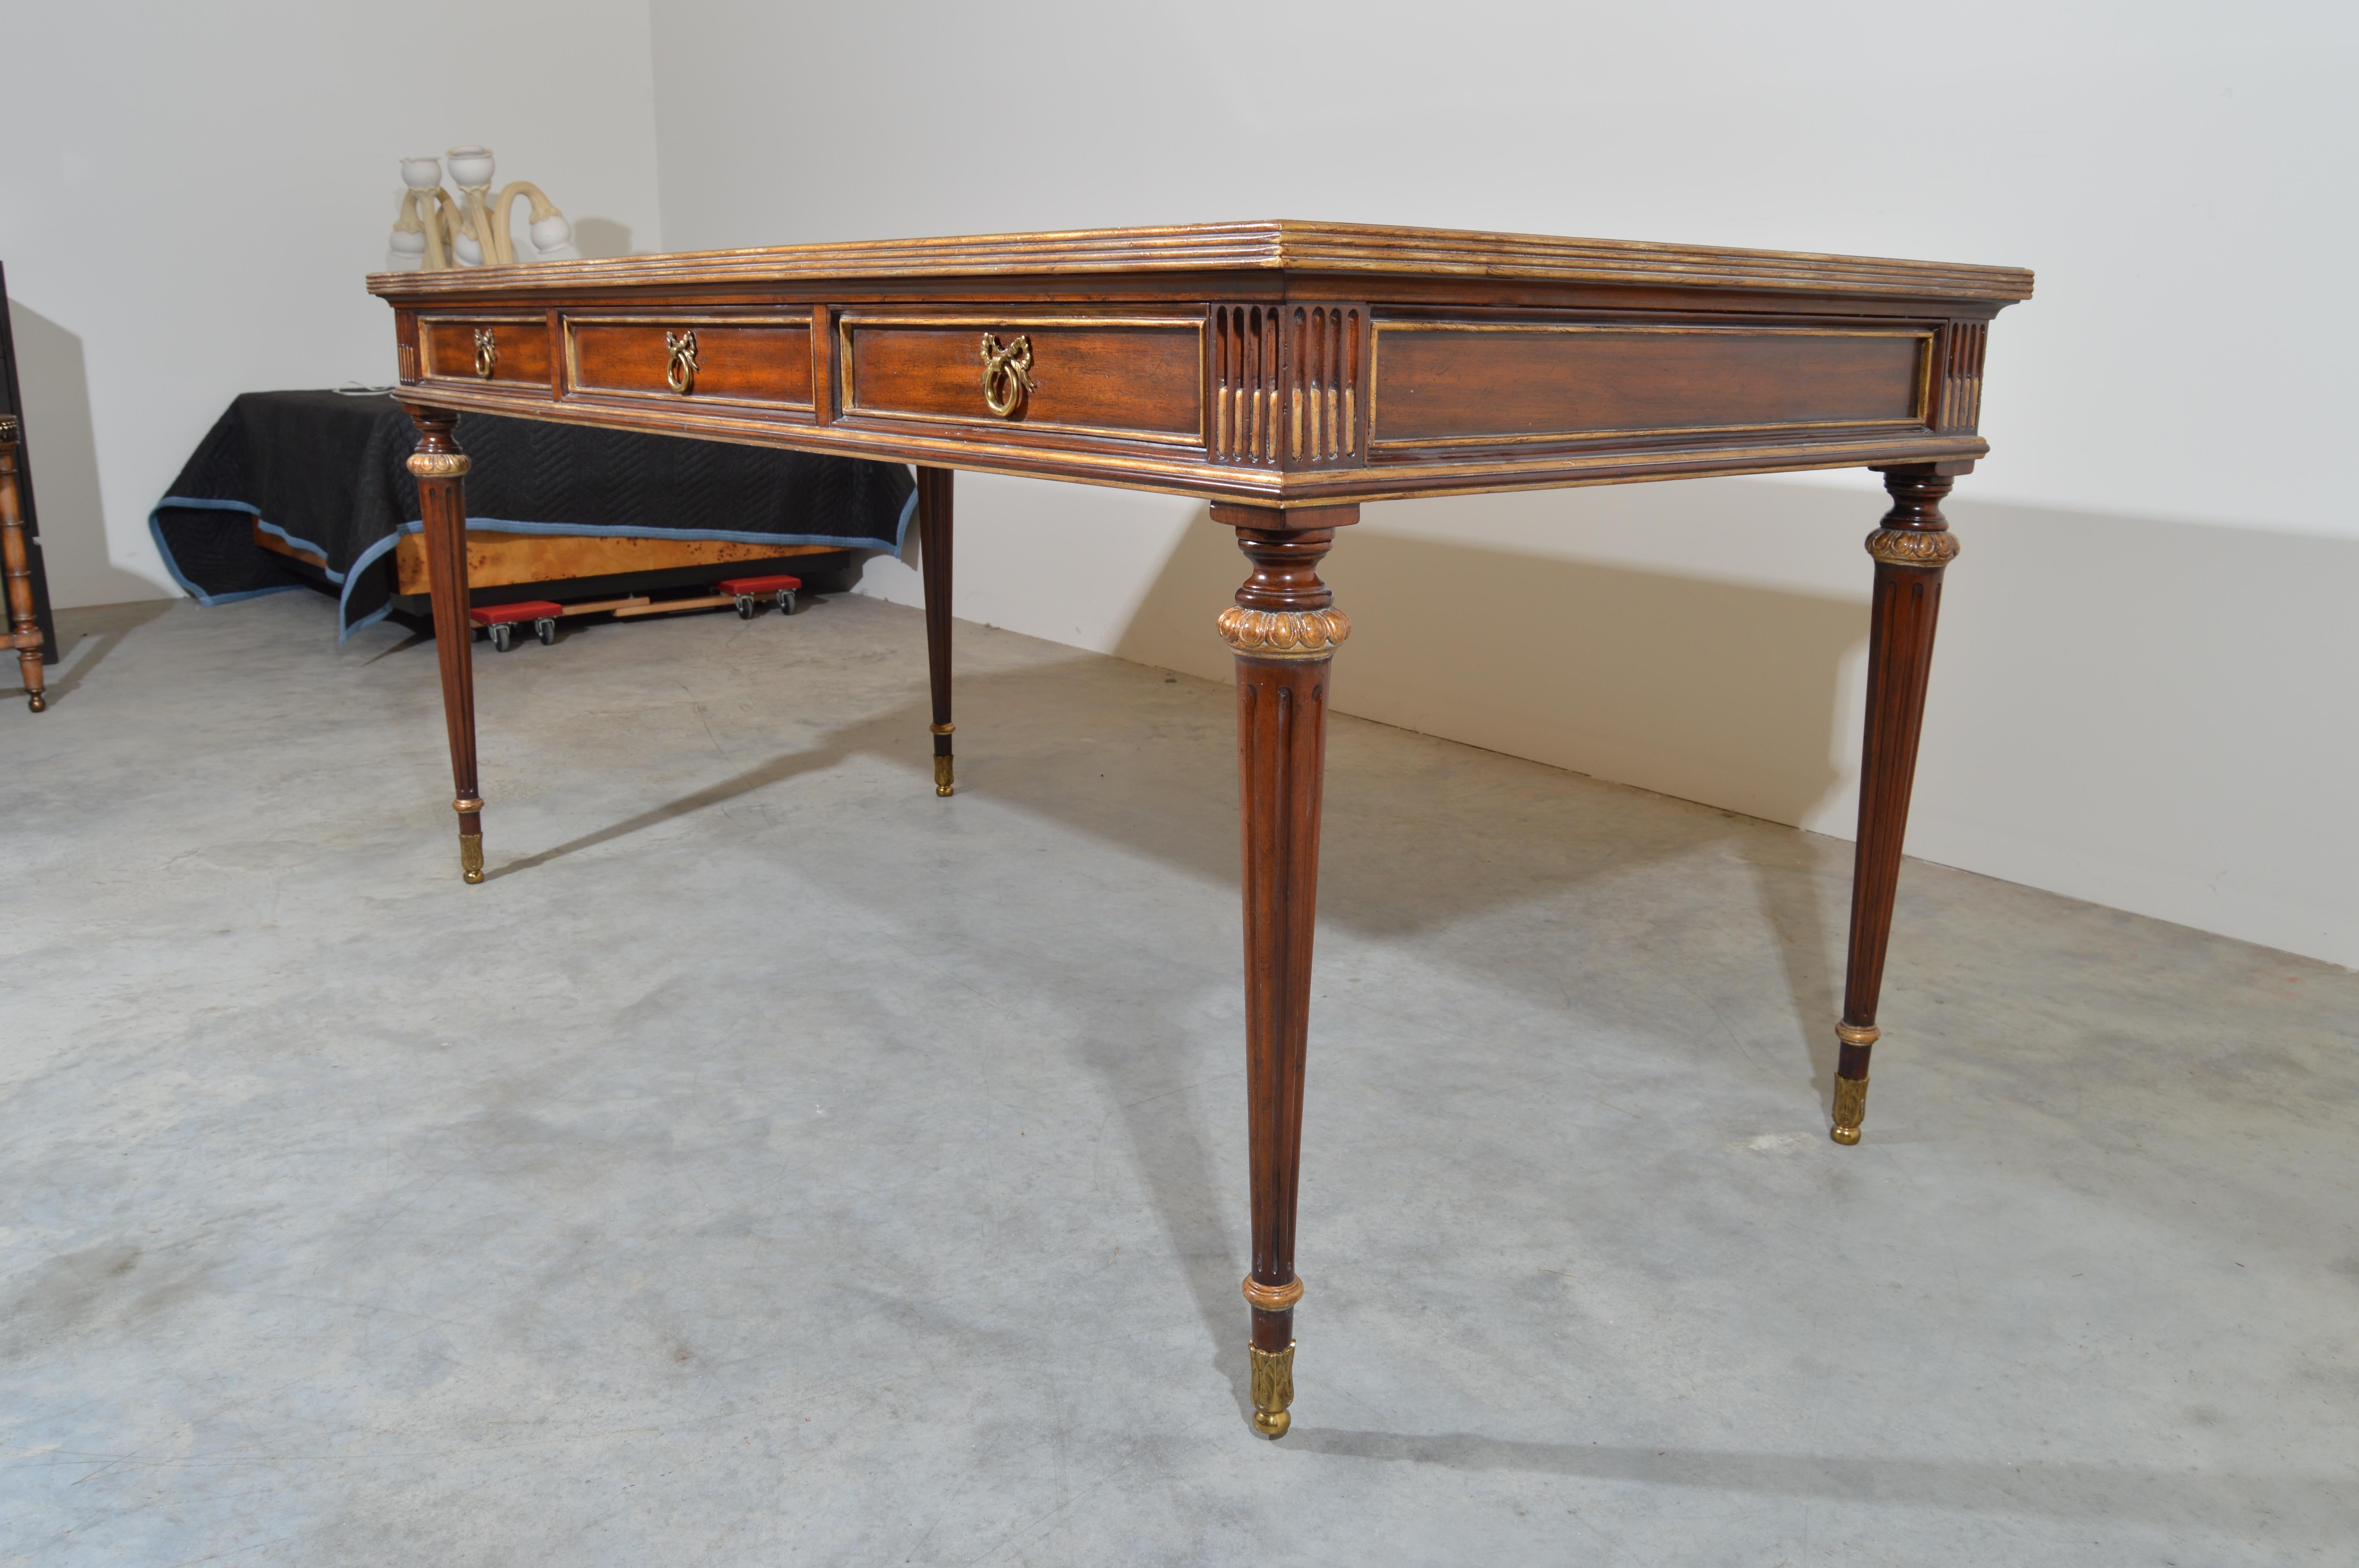 20th Century French Louis XVI Directoire Style Desk by Maitland Smith